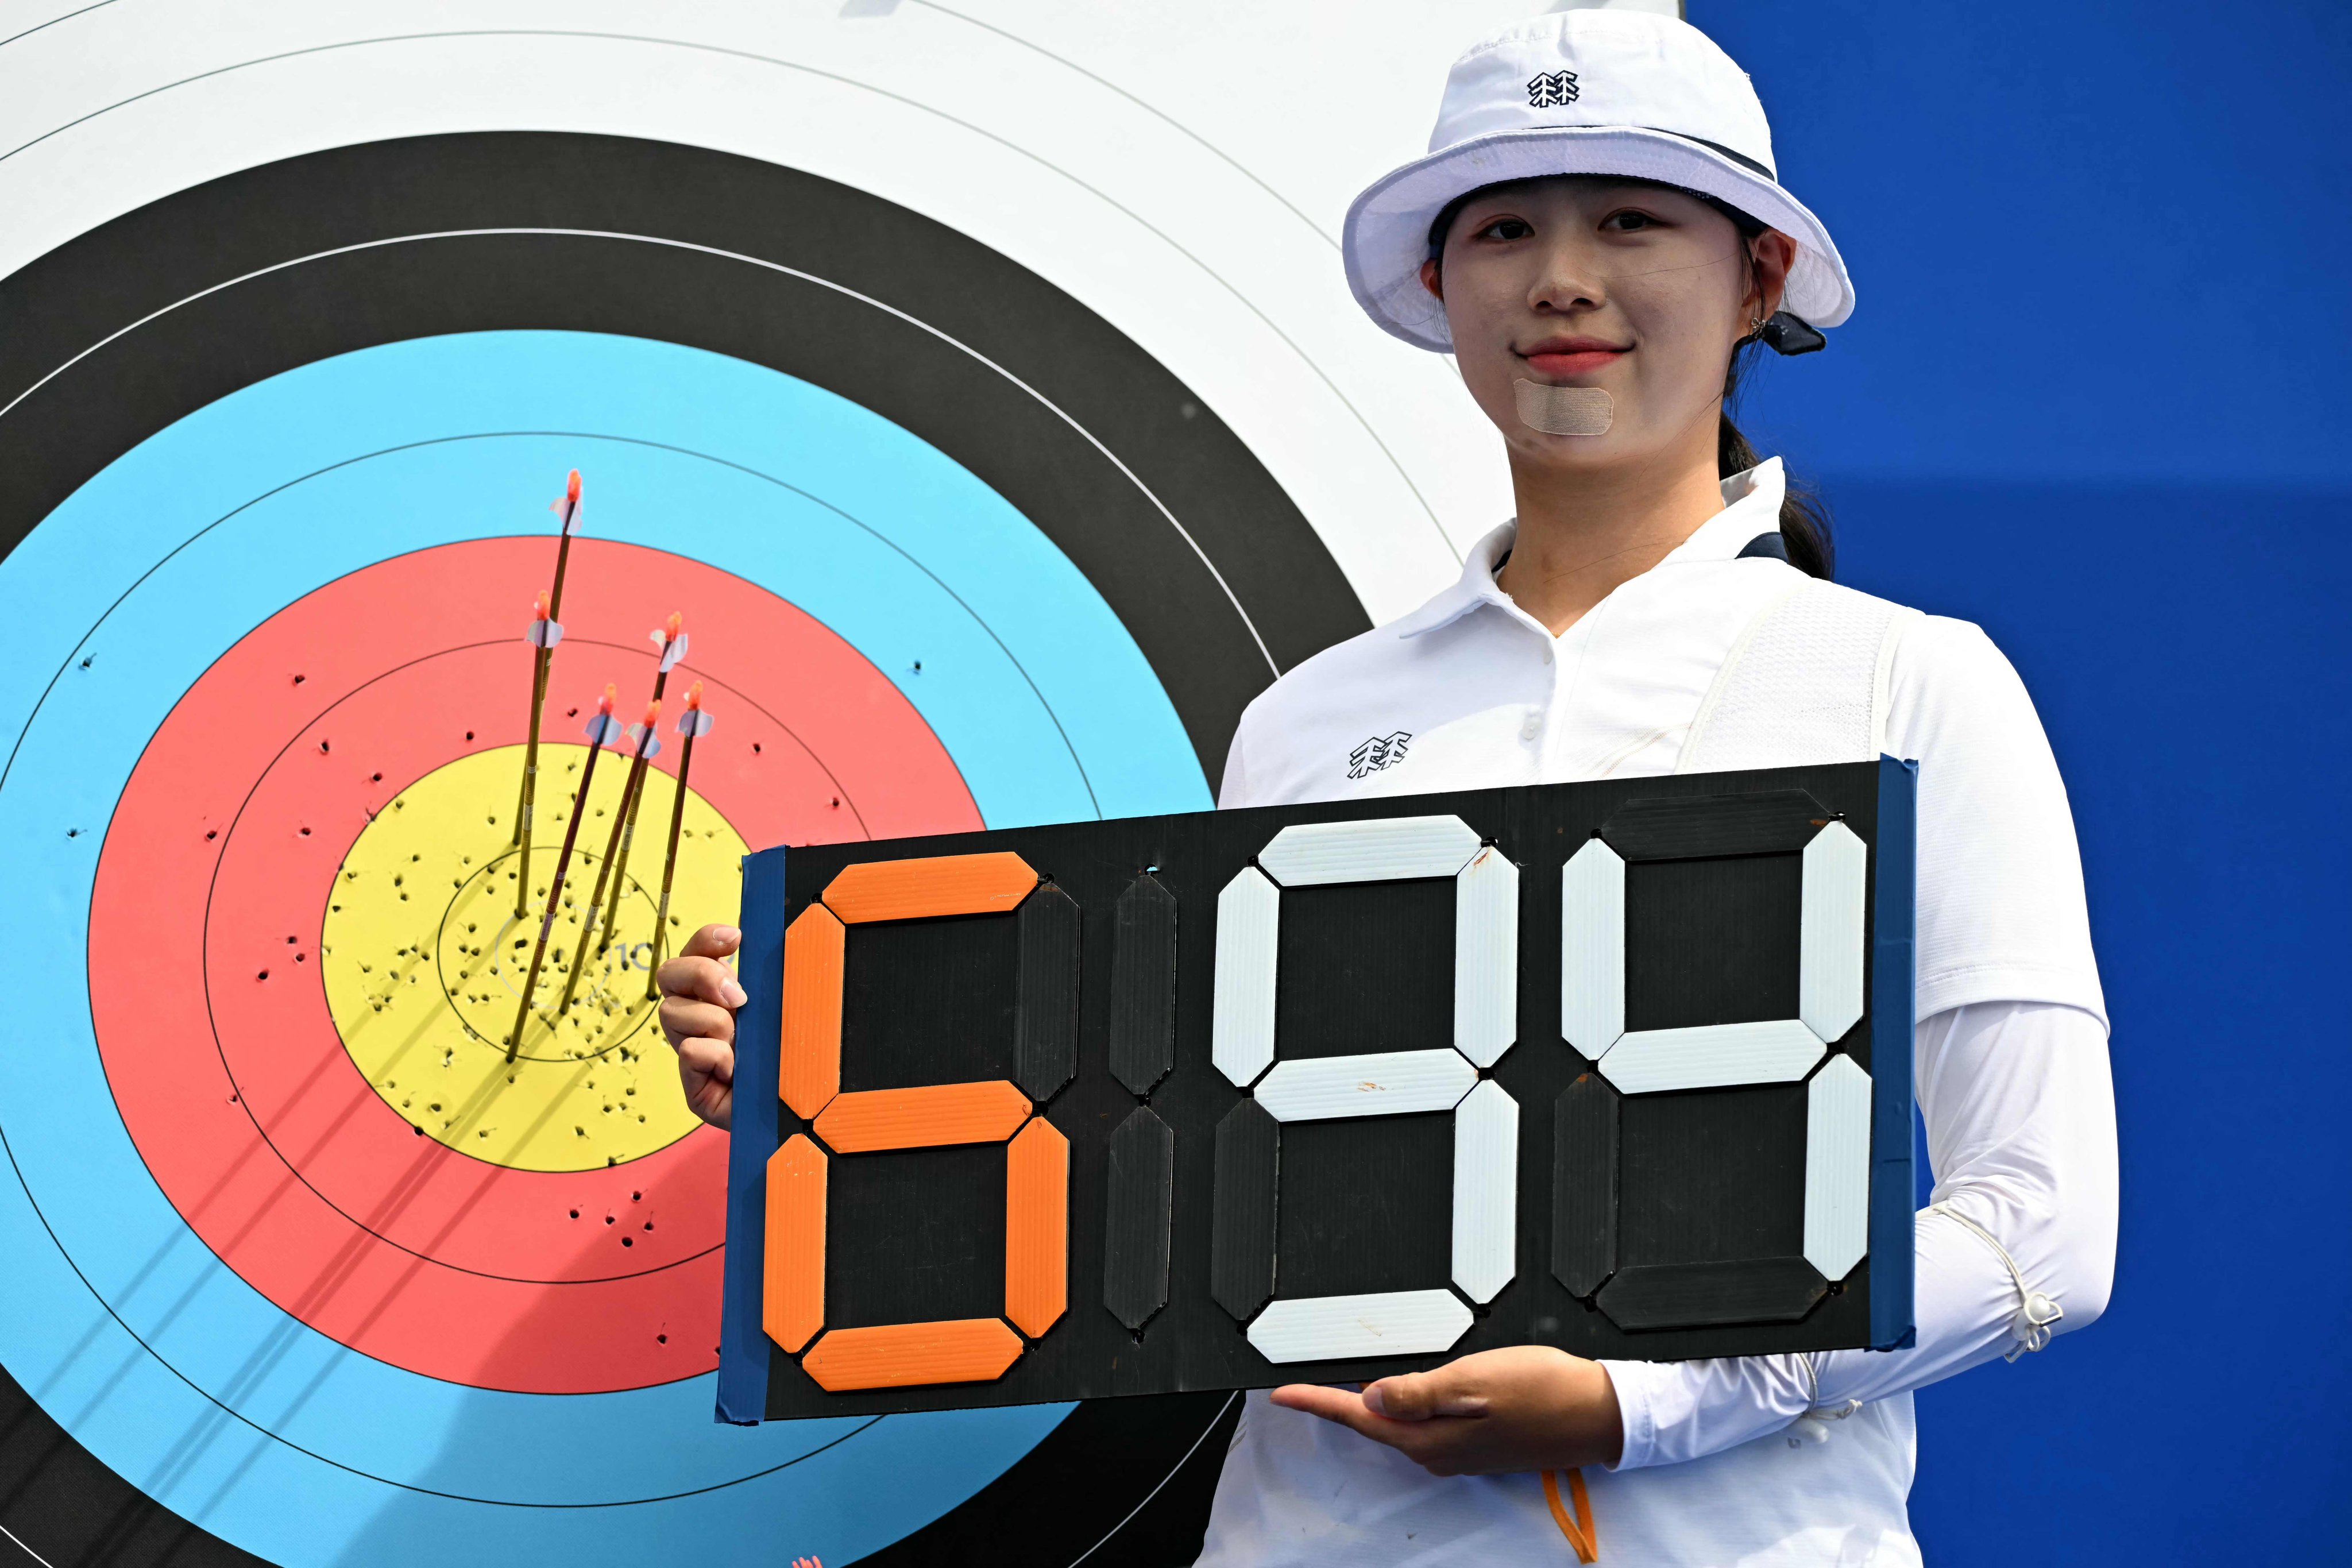 South Korea’s Lim Si-hyeon poses after the women’s individual preliminary round at the Esplanade des Invalides. Photo: AFP